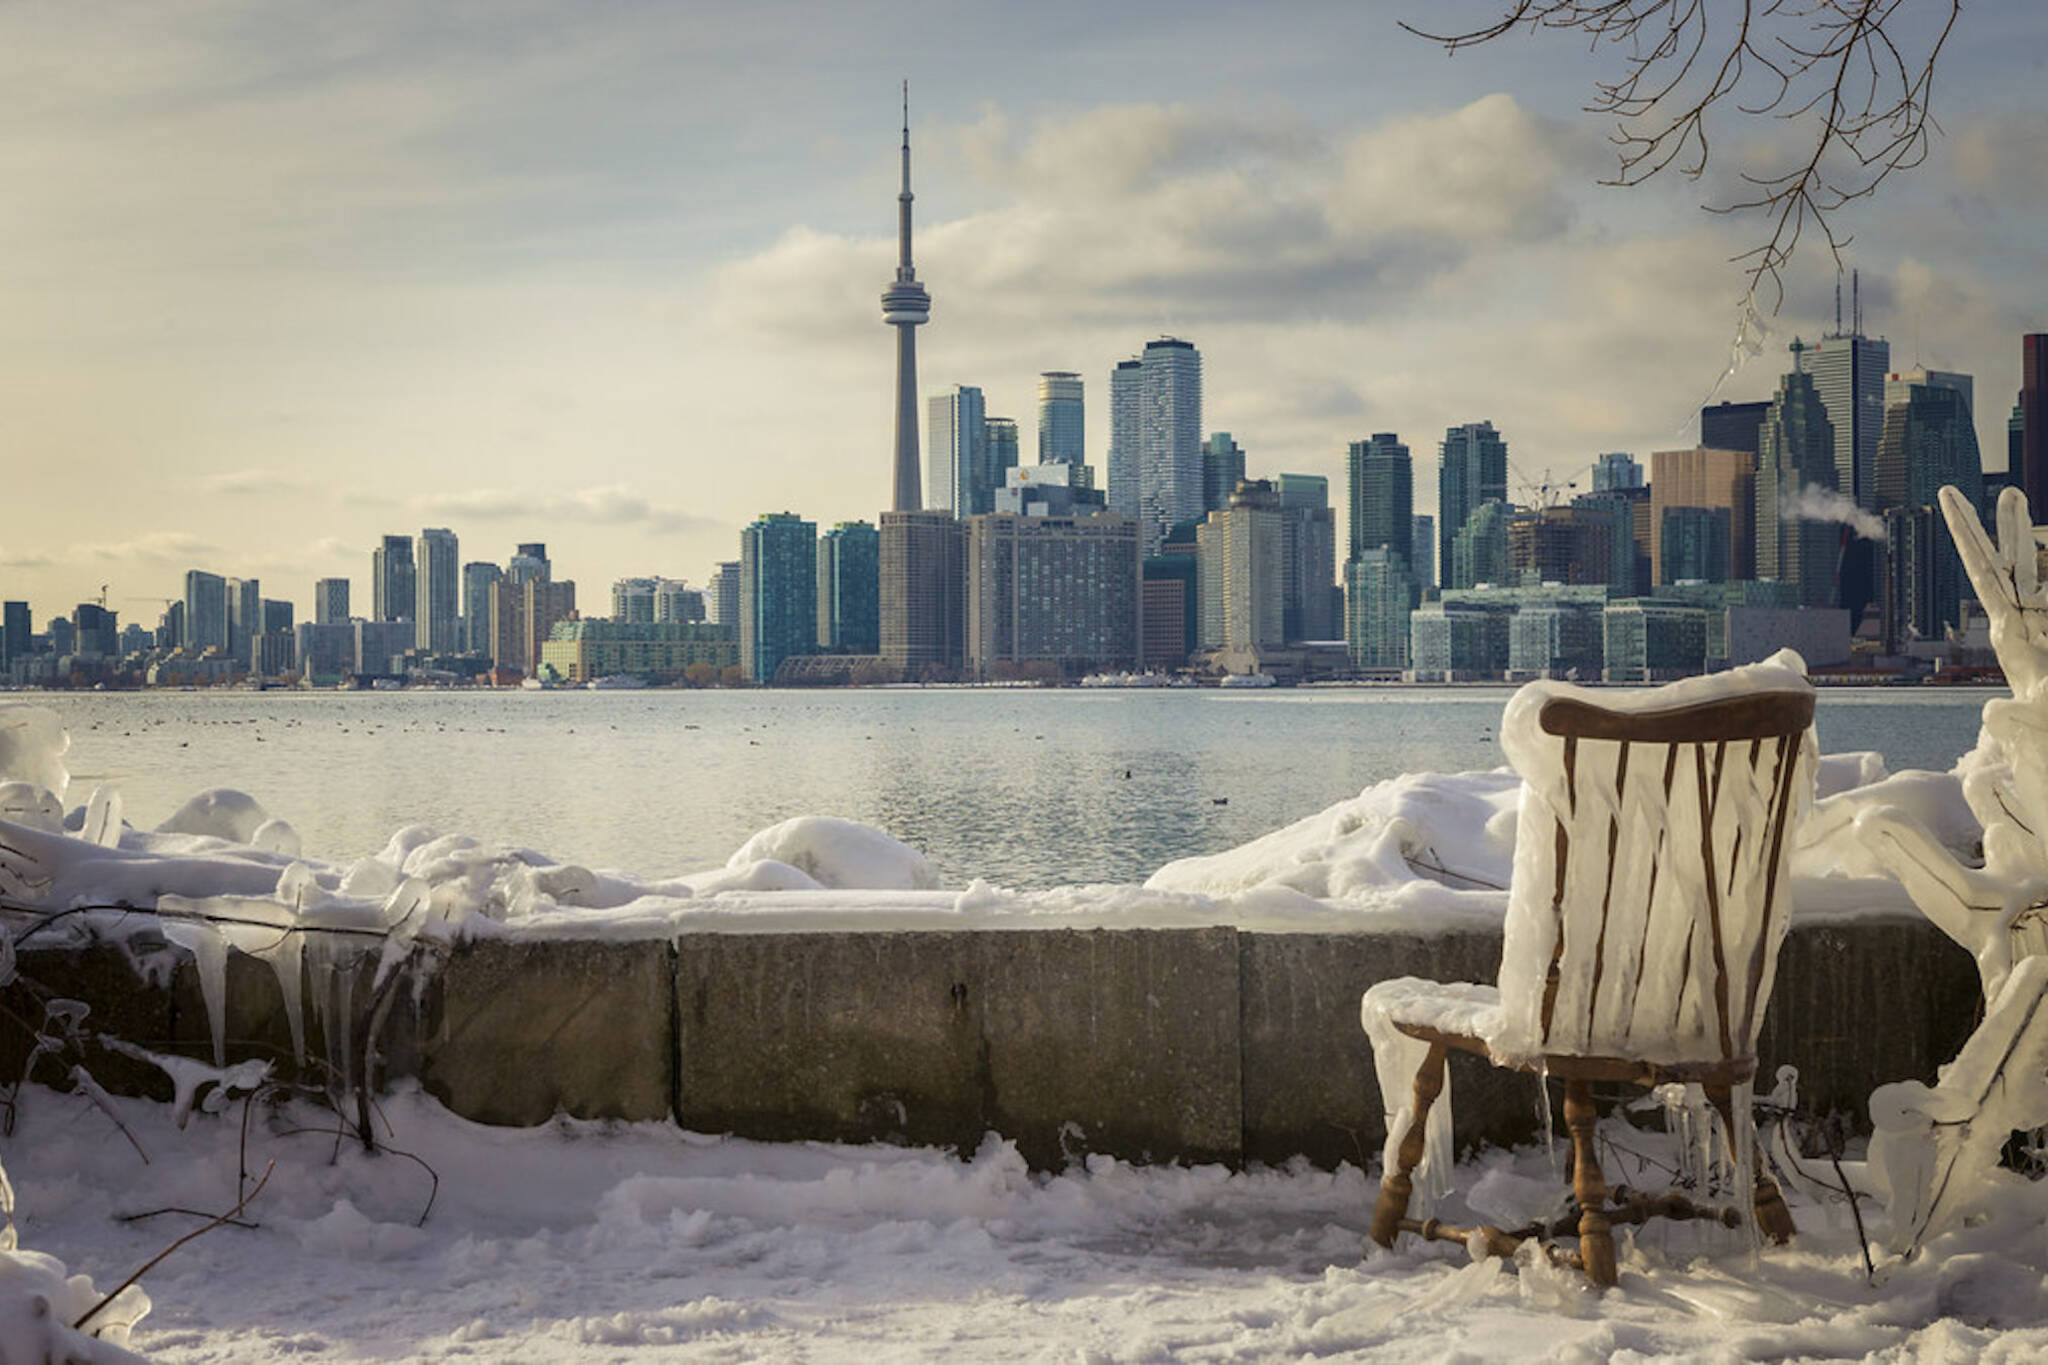 Toronto's spring weather forecast calls for nasty winter storms and